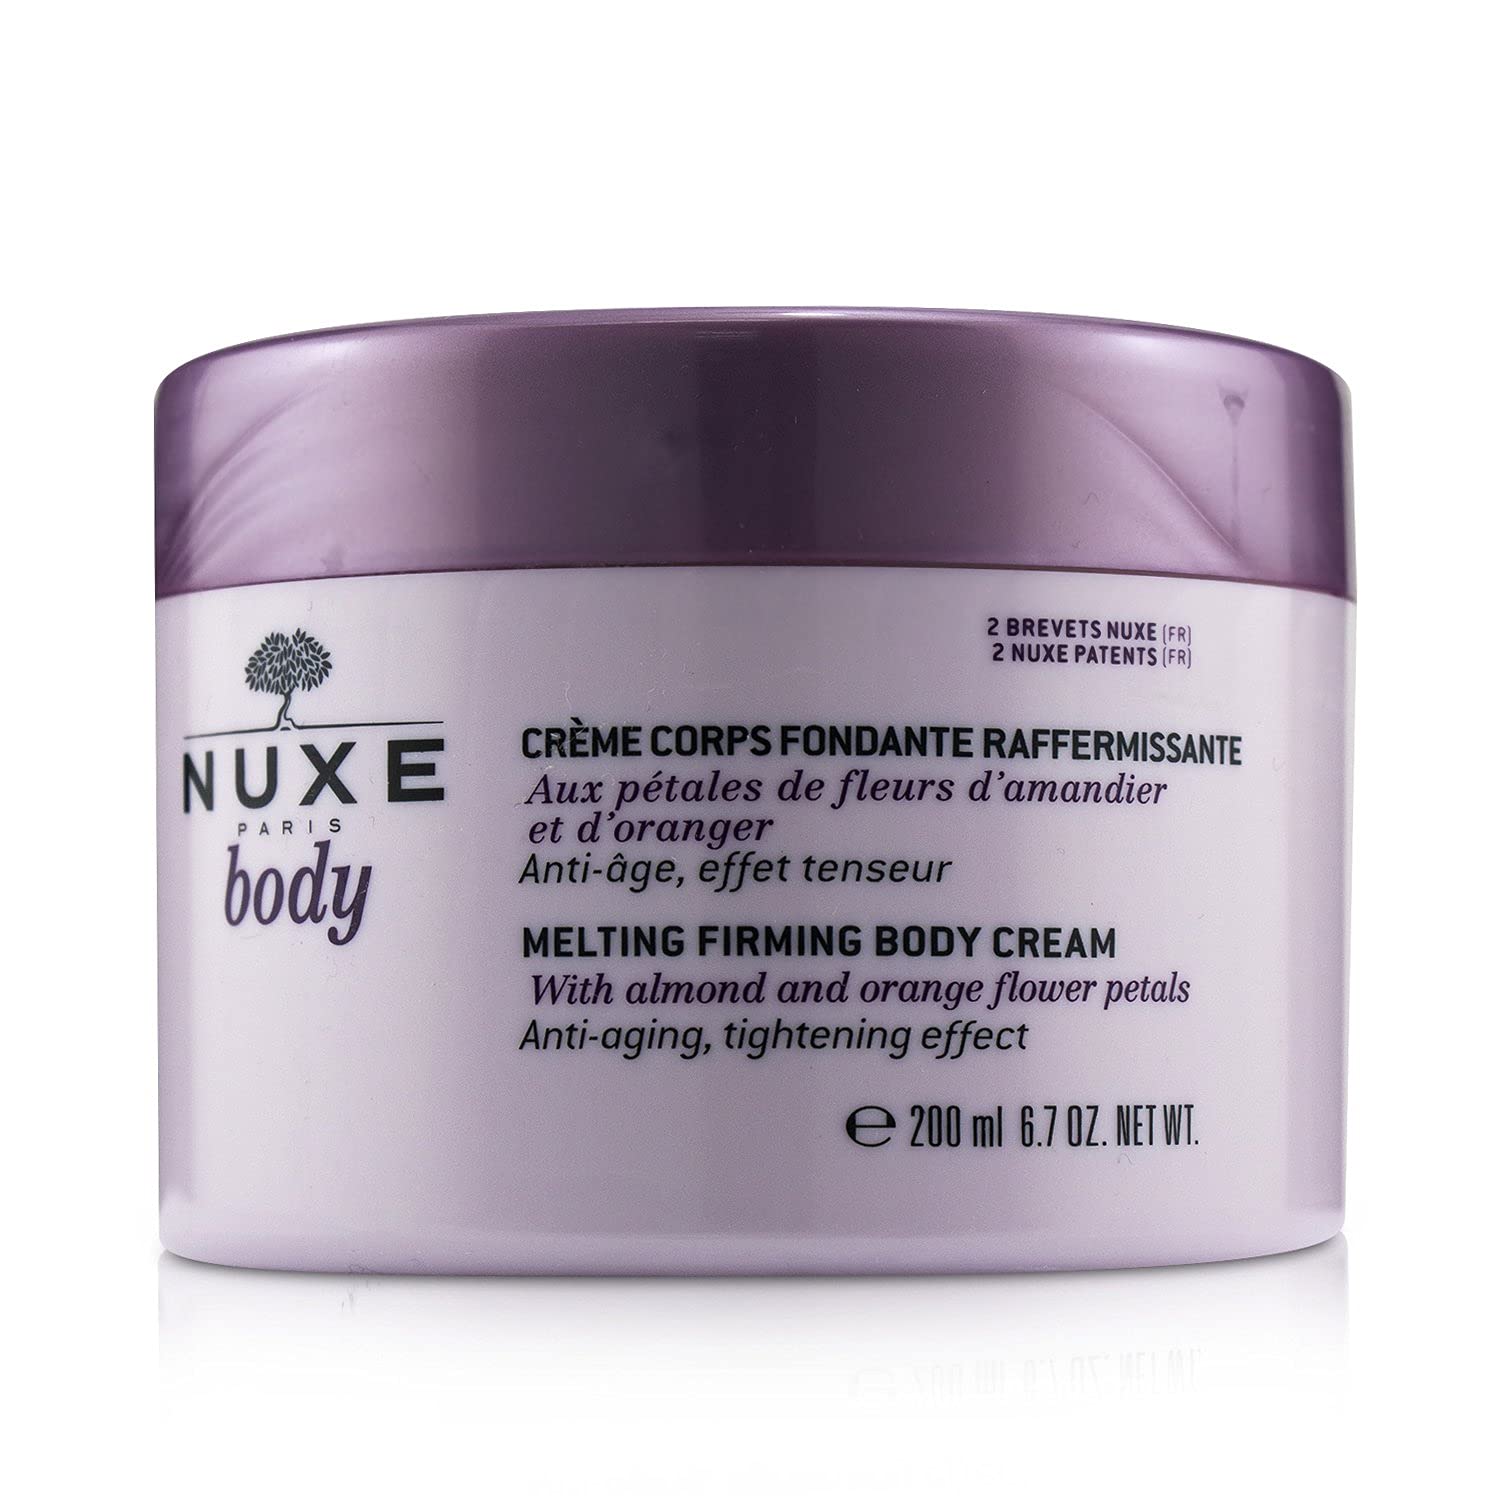 Nuxe Body Cream Pack of 1 (1 x 200 ml)